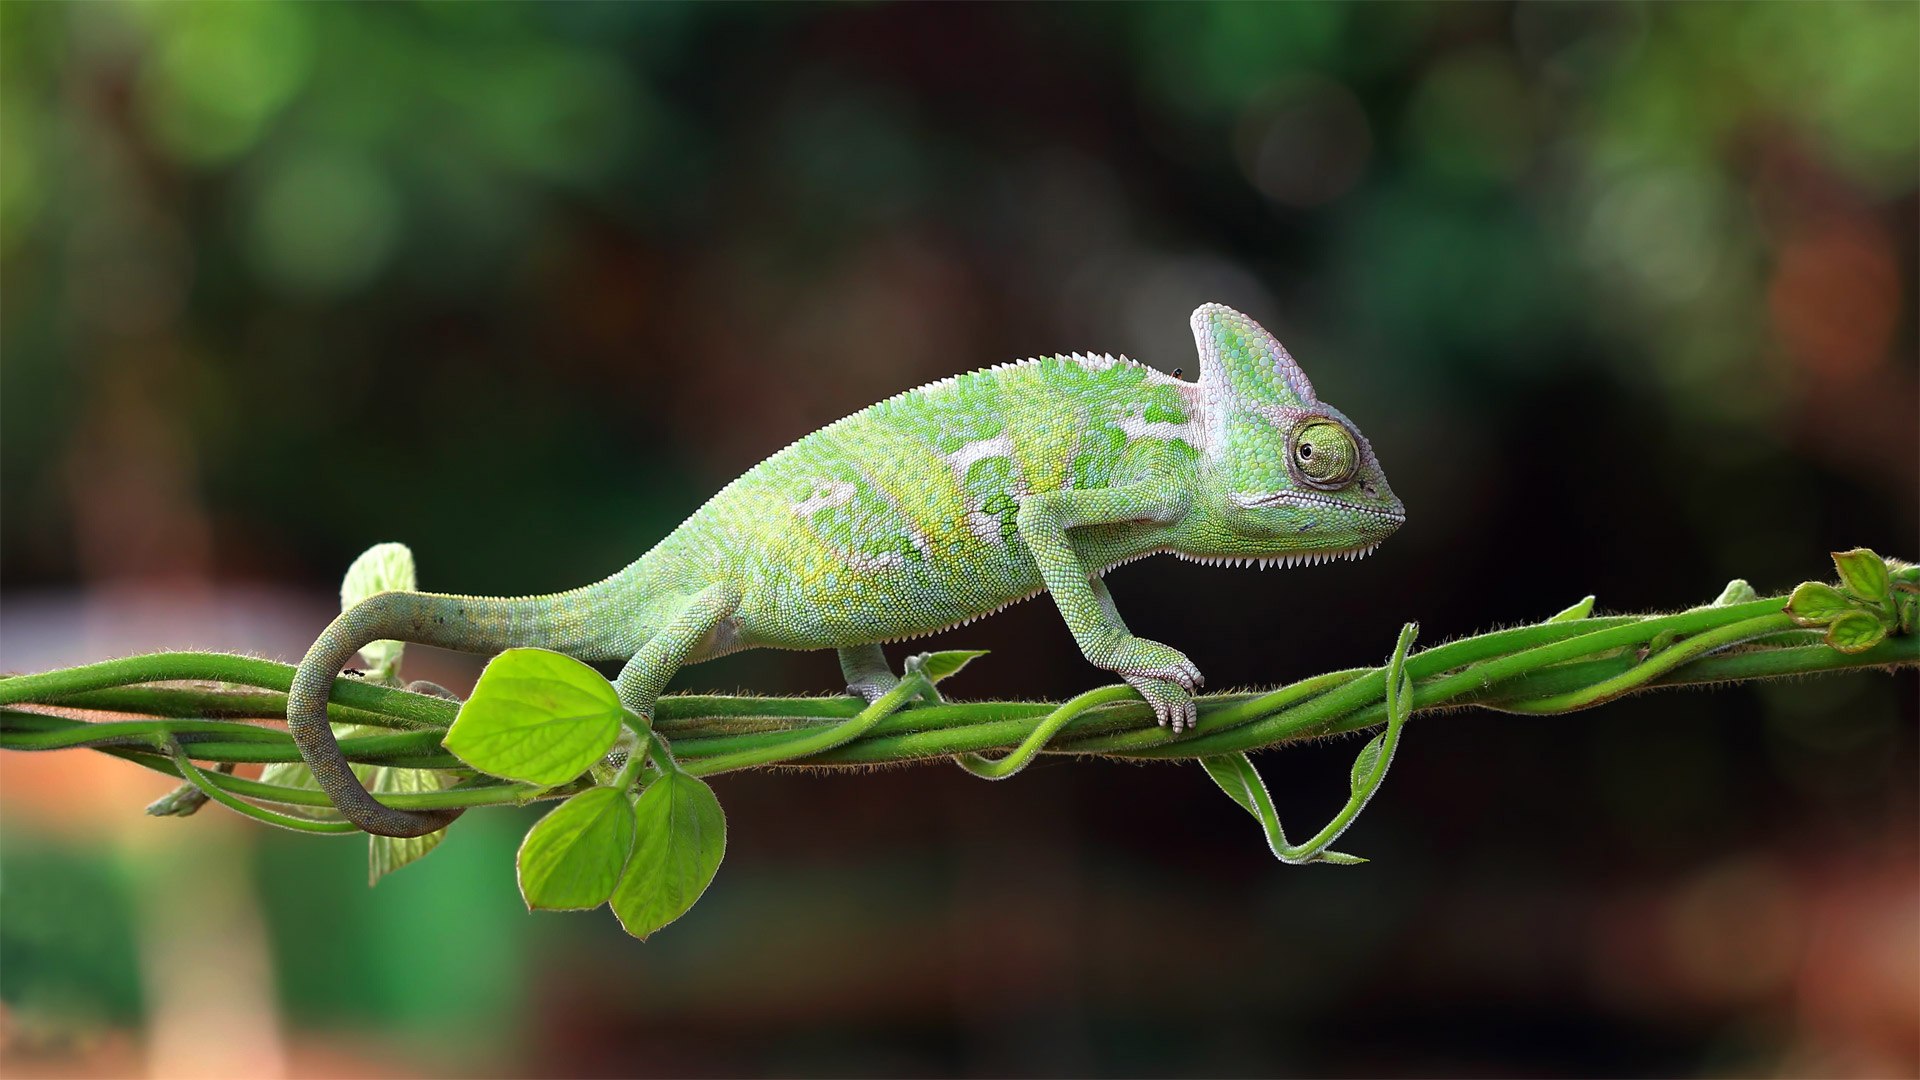 Chameleon walking on a plant, Indonesia - SnapRapid/Offset by Shutterstock)